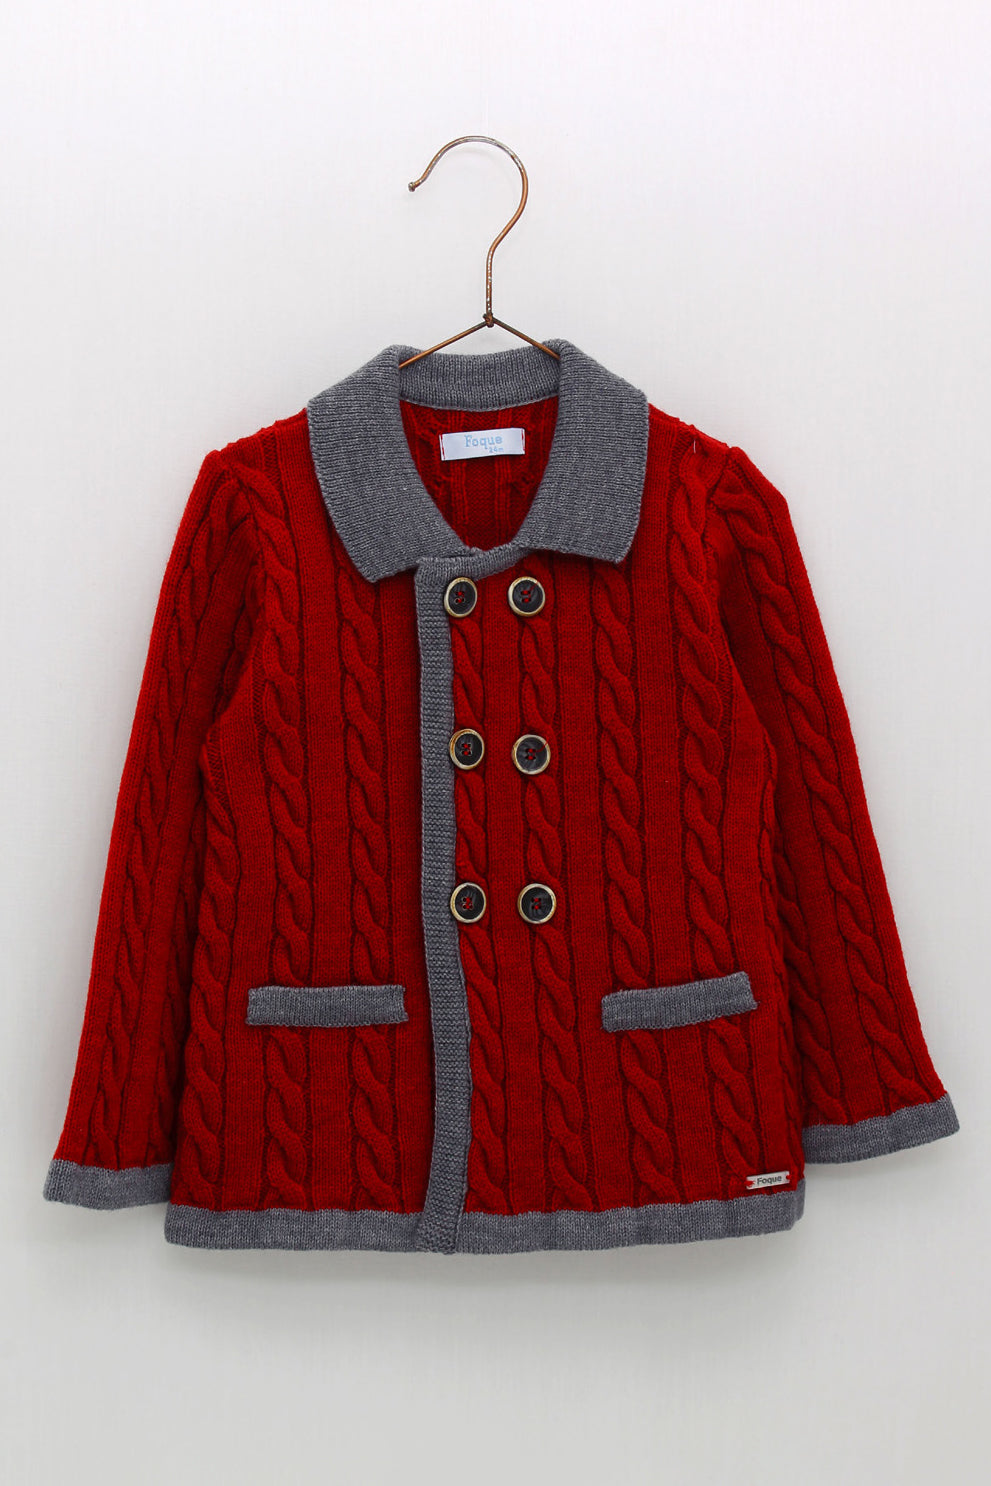 Foque "Humphrey" Red Cable Knit Wool Jacket | iphoneandroidapplications